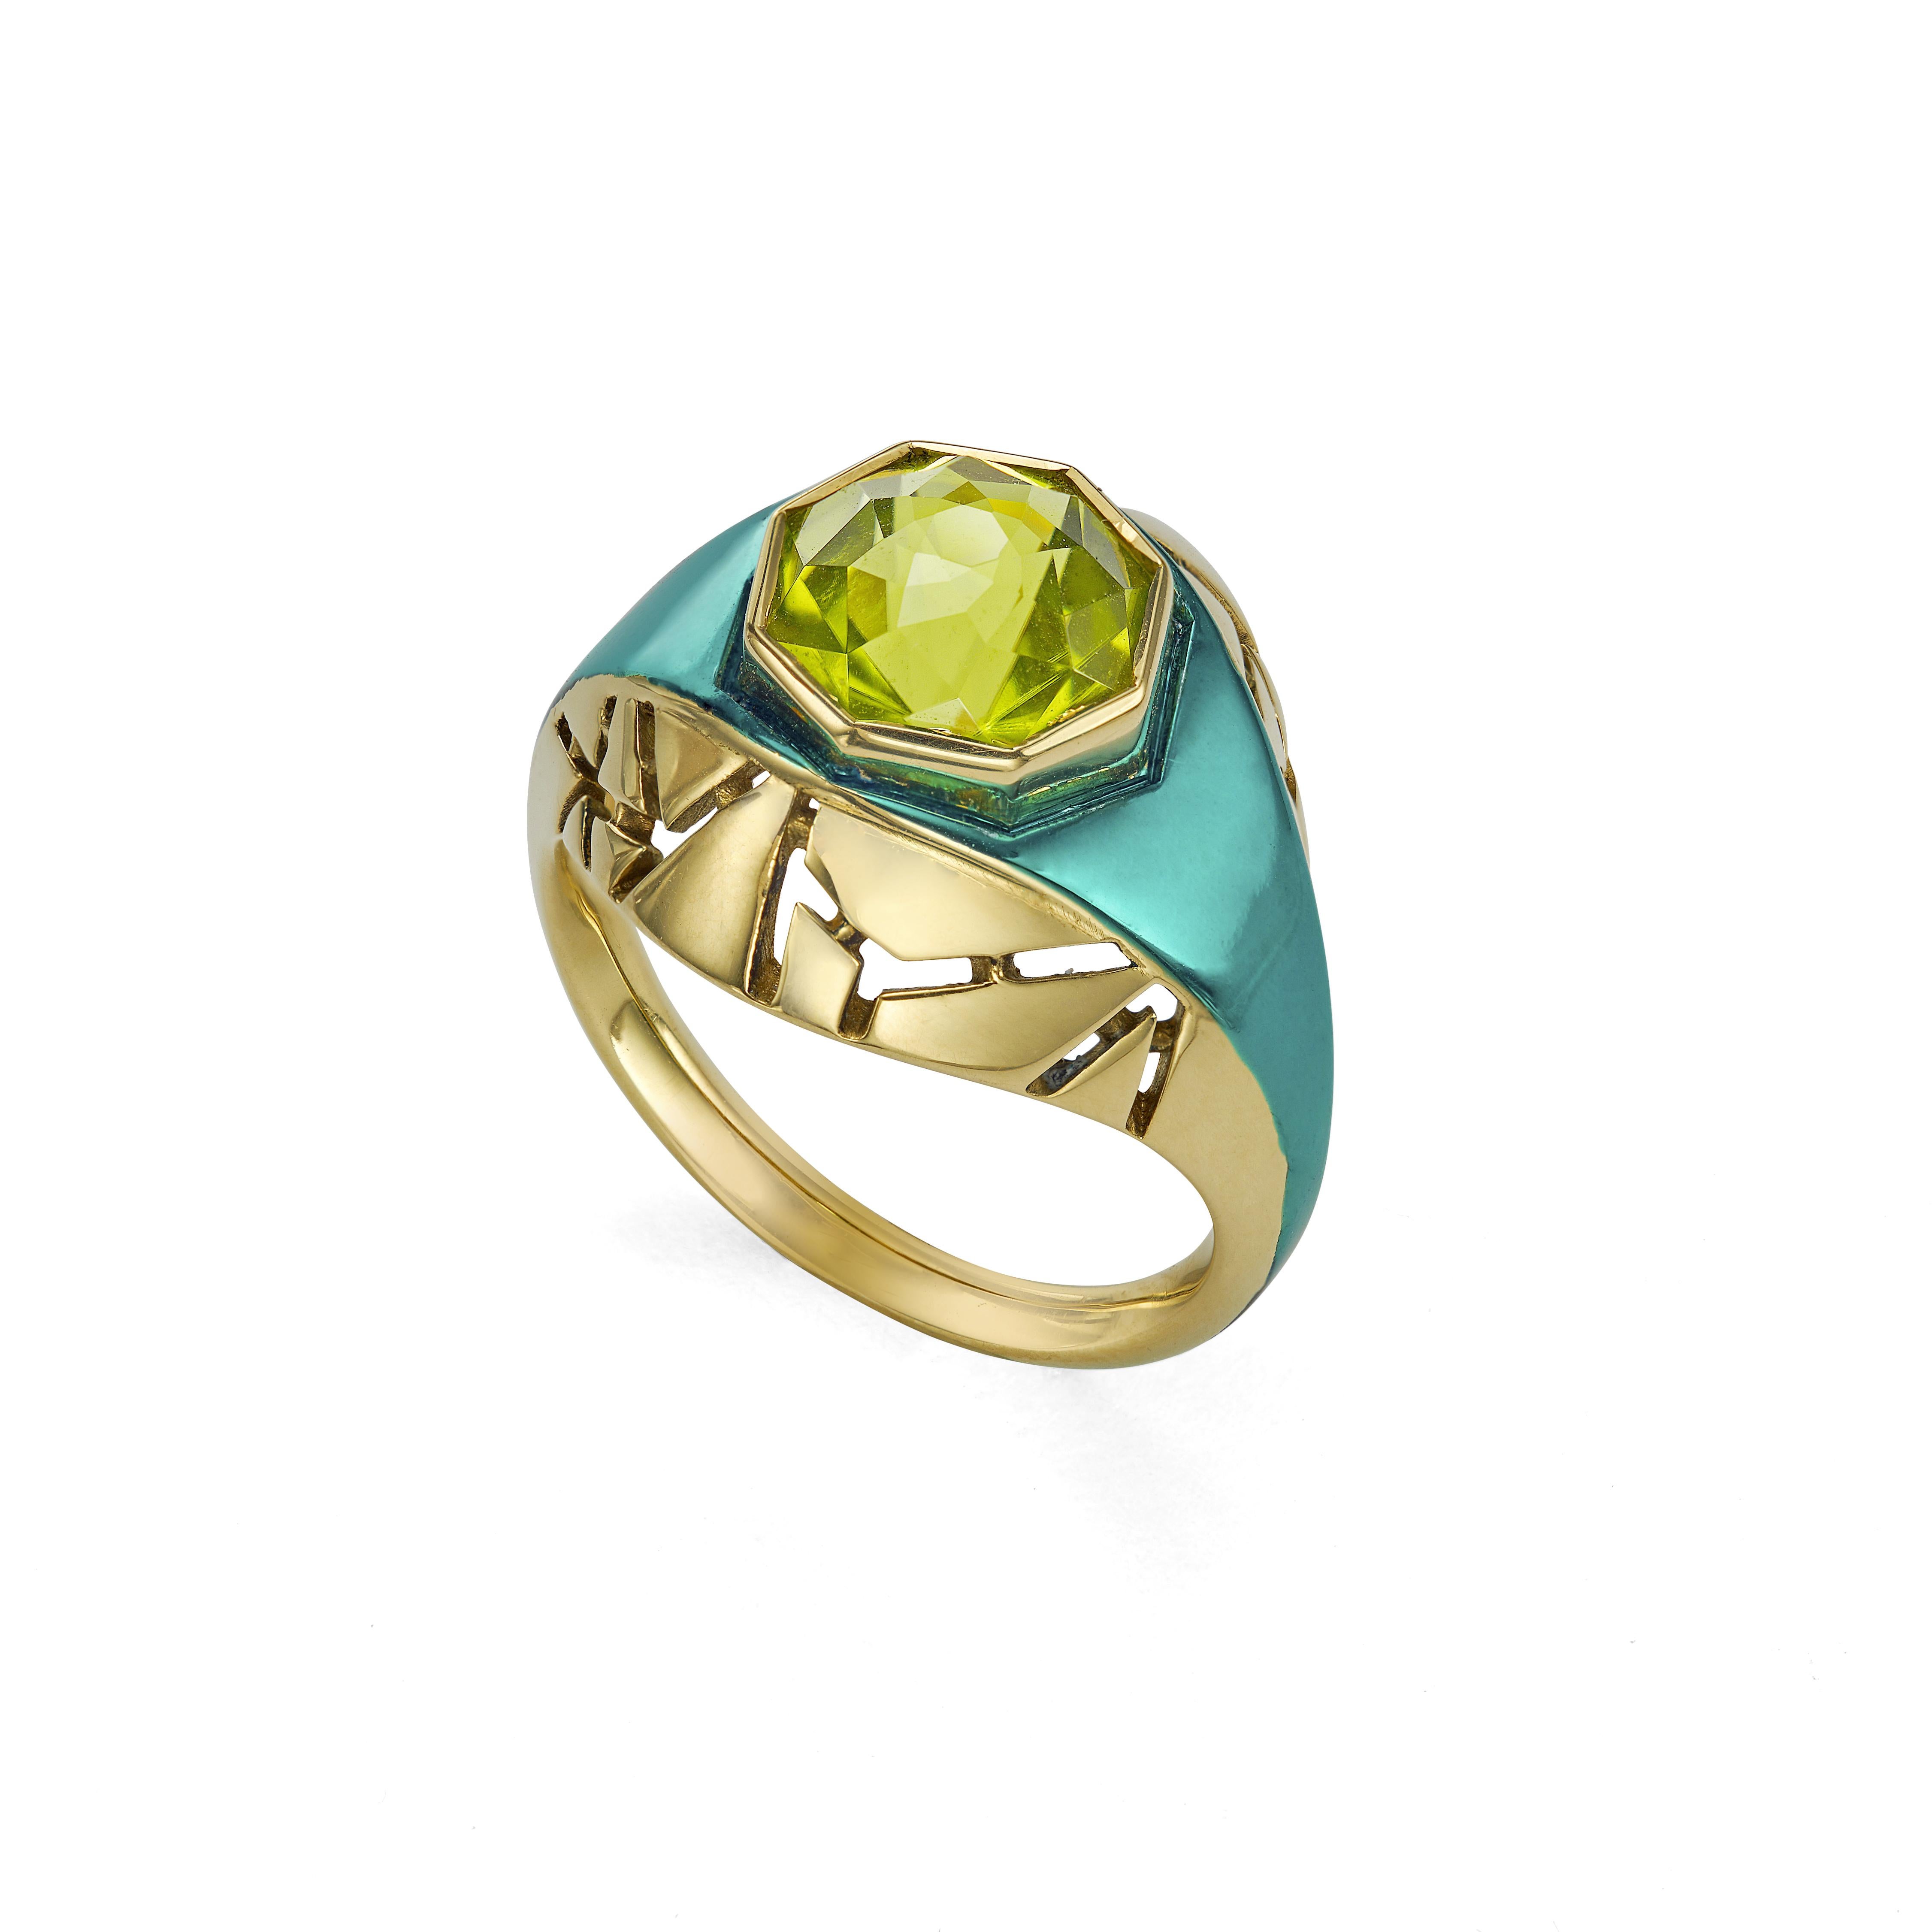 Measurements
Width of ring 17.5mm
Height of ring off finger 7.98mm
Stone dimensions: 8.49mm
Size UK M (US 6.5)

The Rock Hound's Chromanteq 2.95 Carat Afghani Peridot Bombe Ring in 18 Carat Recycled Yellow Gold with our signature Turquoise Coating.